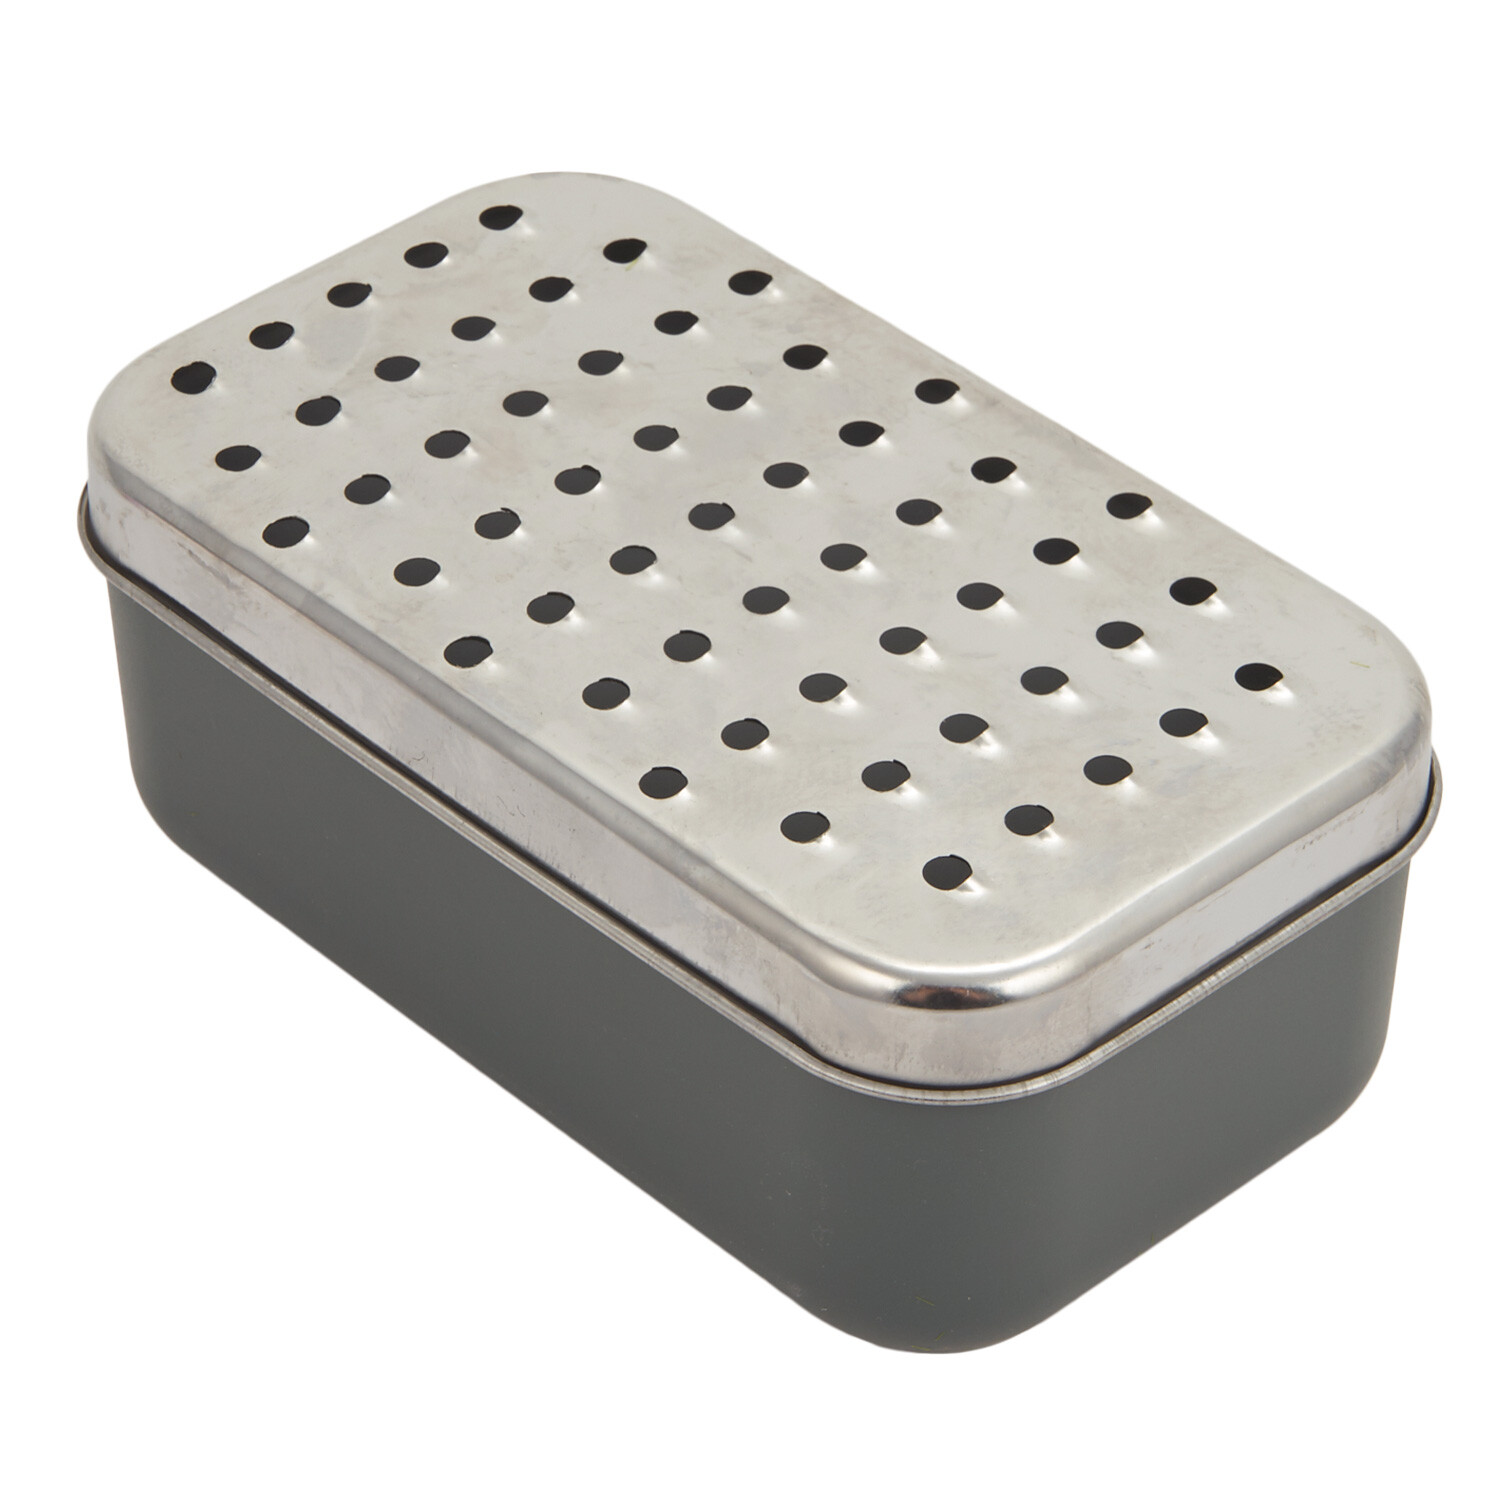 Grater with Plastic Container - Grey Image 3